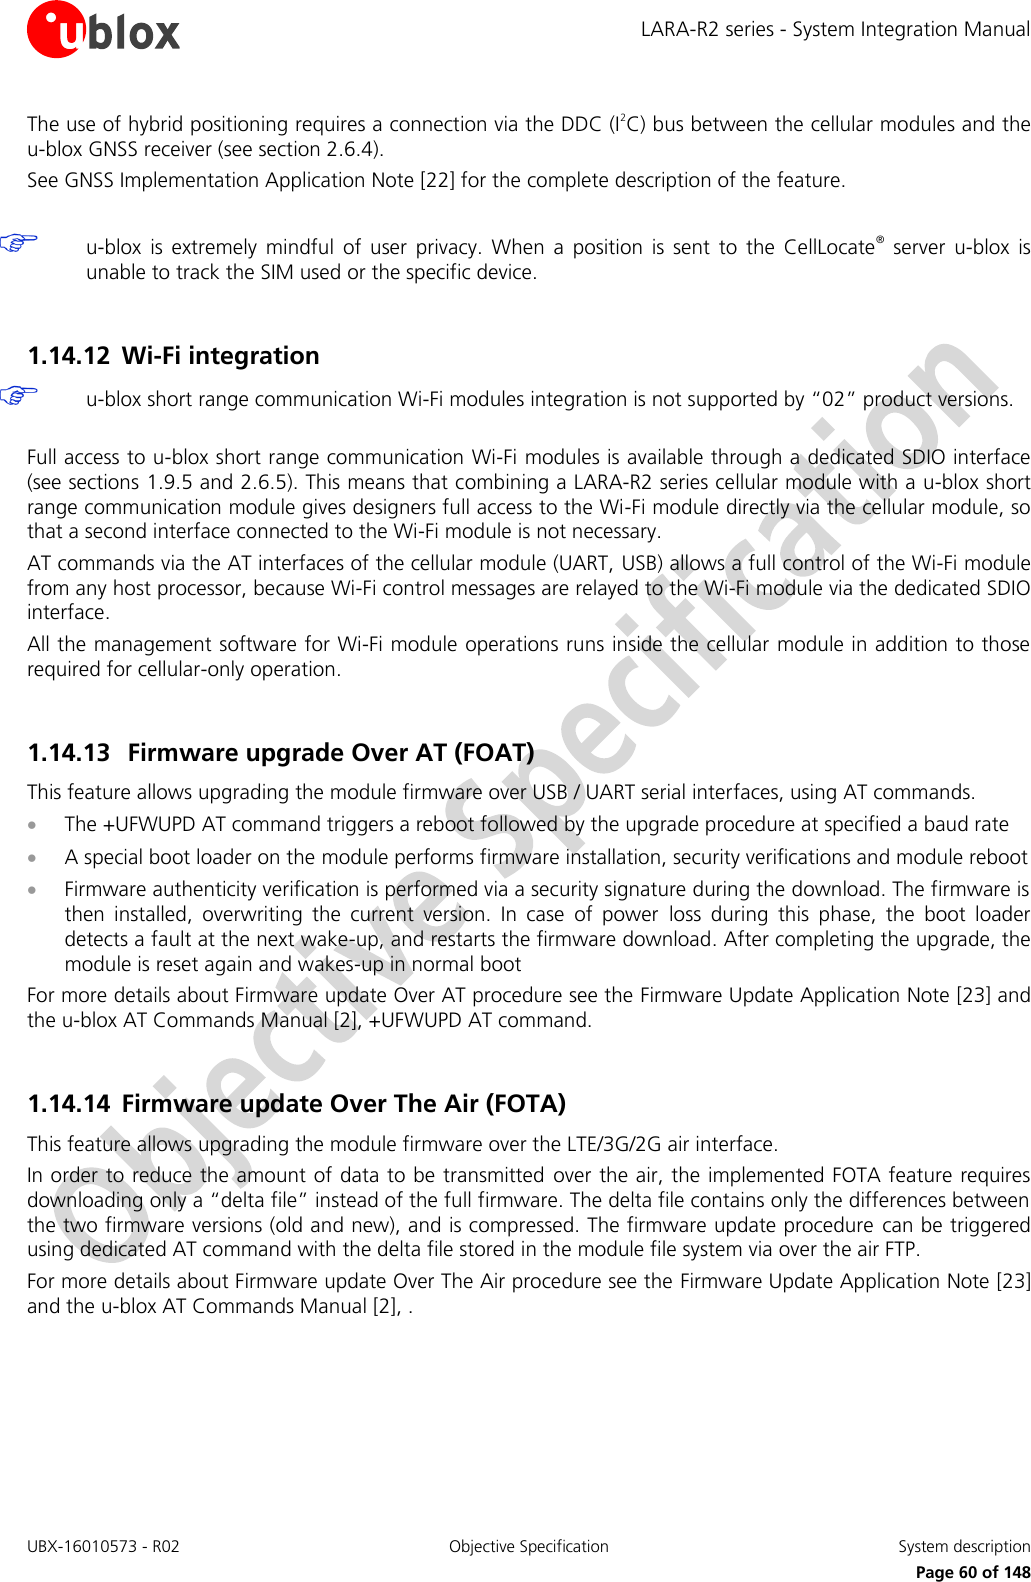 LARA-R2 series - System Integration Manual UBX-16010573 - R02  Objective Specification  System description     Page 60 of 148 The use of hybrid positioning requires a connection via the DDC (I2C) bus between the cellular modules and the u-blox GNSS receiver (see section 2.6.4). See GNSS Implementation Application Note [22] for the complete description of the feature.   u-blox  is  extremely  mindful  of  user  privacy.  When  a  position  is  sent  to  the  CellLocate®  server  u-blox  is unable to track the SIM used or the specific device.  1.14.12 Wi-Fi integration  u-blox short range communication Wi-Fi modules integration is not supported by “02” product versions.  Full access to u-blox short range communication Wi-Fi modules is available through a dedicated SDIO interface (see sections 1.9.5 and 2.6.5). This means that combining a LARA-R2 series cellular module with a u-blox short range communication module gives designers full access to the Wi-Fi module directly via the cellular module, so that a second interface connected to the Wi-Fi module is not necessary.  AT commands via the AT interfaces of the cellular module (UART, USB) allows a full control of the Wi-Fi module from any host processor, because Wi-Fi control messages are relayed to the Wi-Fi module via the dedicated SDIO interface. All the management software for Wi-Fi module operations runs inside the cellular module in addition to those required for cellular-only operation.  1.14.13 Firmware upgrade Over AT (FOAT) This feature allows upgrading the module firmware over USB / UART serial interfaces, using AT commands.  The +UFWUPD AT command triggers a reboot followed by the upgrade procedure at specified a baud rate  A special boot loader on the module performs firmware installation, security verifications and module reboot  Firmware authenticity verification is performed via a security signature during the download. The firmware is then  installed,  overwriting  the  current  version.  In  case  of  power  loss  during  this  phase,  the  boot  loader detects a fault at the next wake-up, and restarts the firmware download. After completing the upgrade, the module is reset again and wakes-up in normal boot For more details about Firmware update Over AT procedure see the Firmware Update Application Note [23] and the u-blox AT Commands Manual [2], +UFWUPD AT command.  1.14.14 Firmware update Over The Air (FOTA) This feature allows upgrading the module firmware over the LTE/3G/2G air interface.  In order to reduce the amount of data to be transmitted  over the air, the implemented FOTA feature requires downloading only a “delta file” instead of the full firmware. The delta file contains only the differences between the two firmware versions (old and new), and is compressed. The firmware update procedure can be triggered using dedicated AT command with the delta file stored in the module file system via over the air FTP. For more details about Firmware update Over The Air procedure see the Firmware Update Application Note [23] and the u-blox AT Commands Manual [2], .  